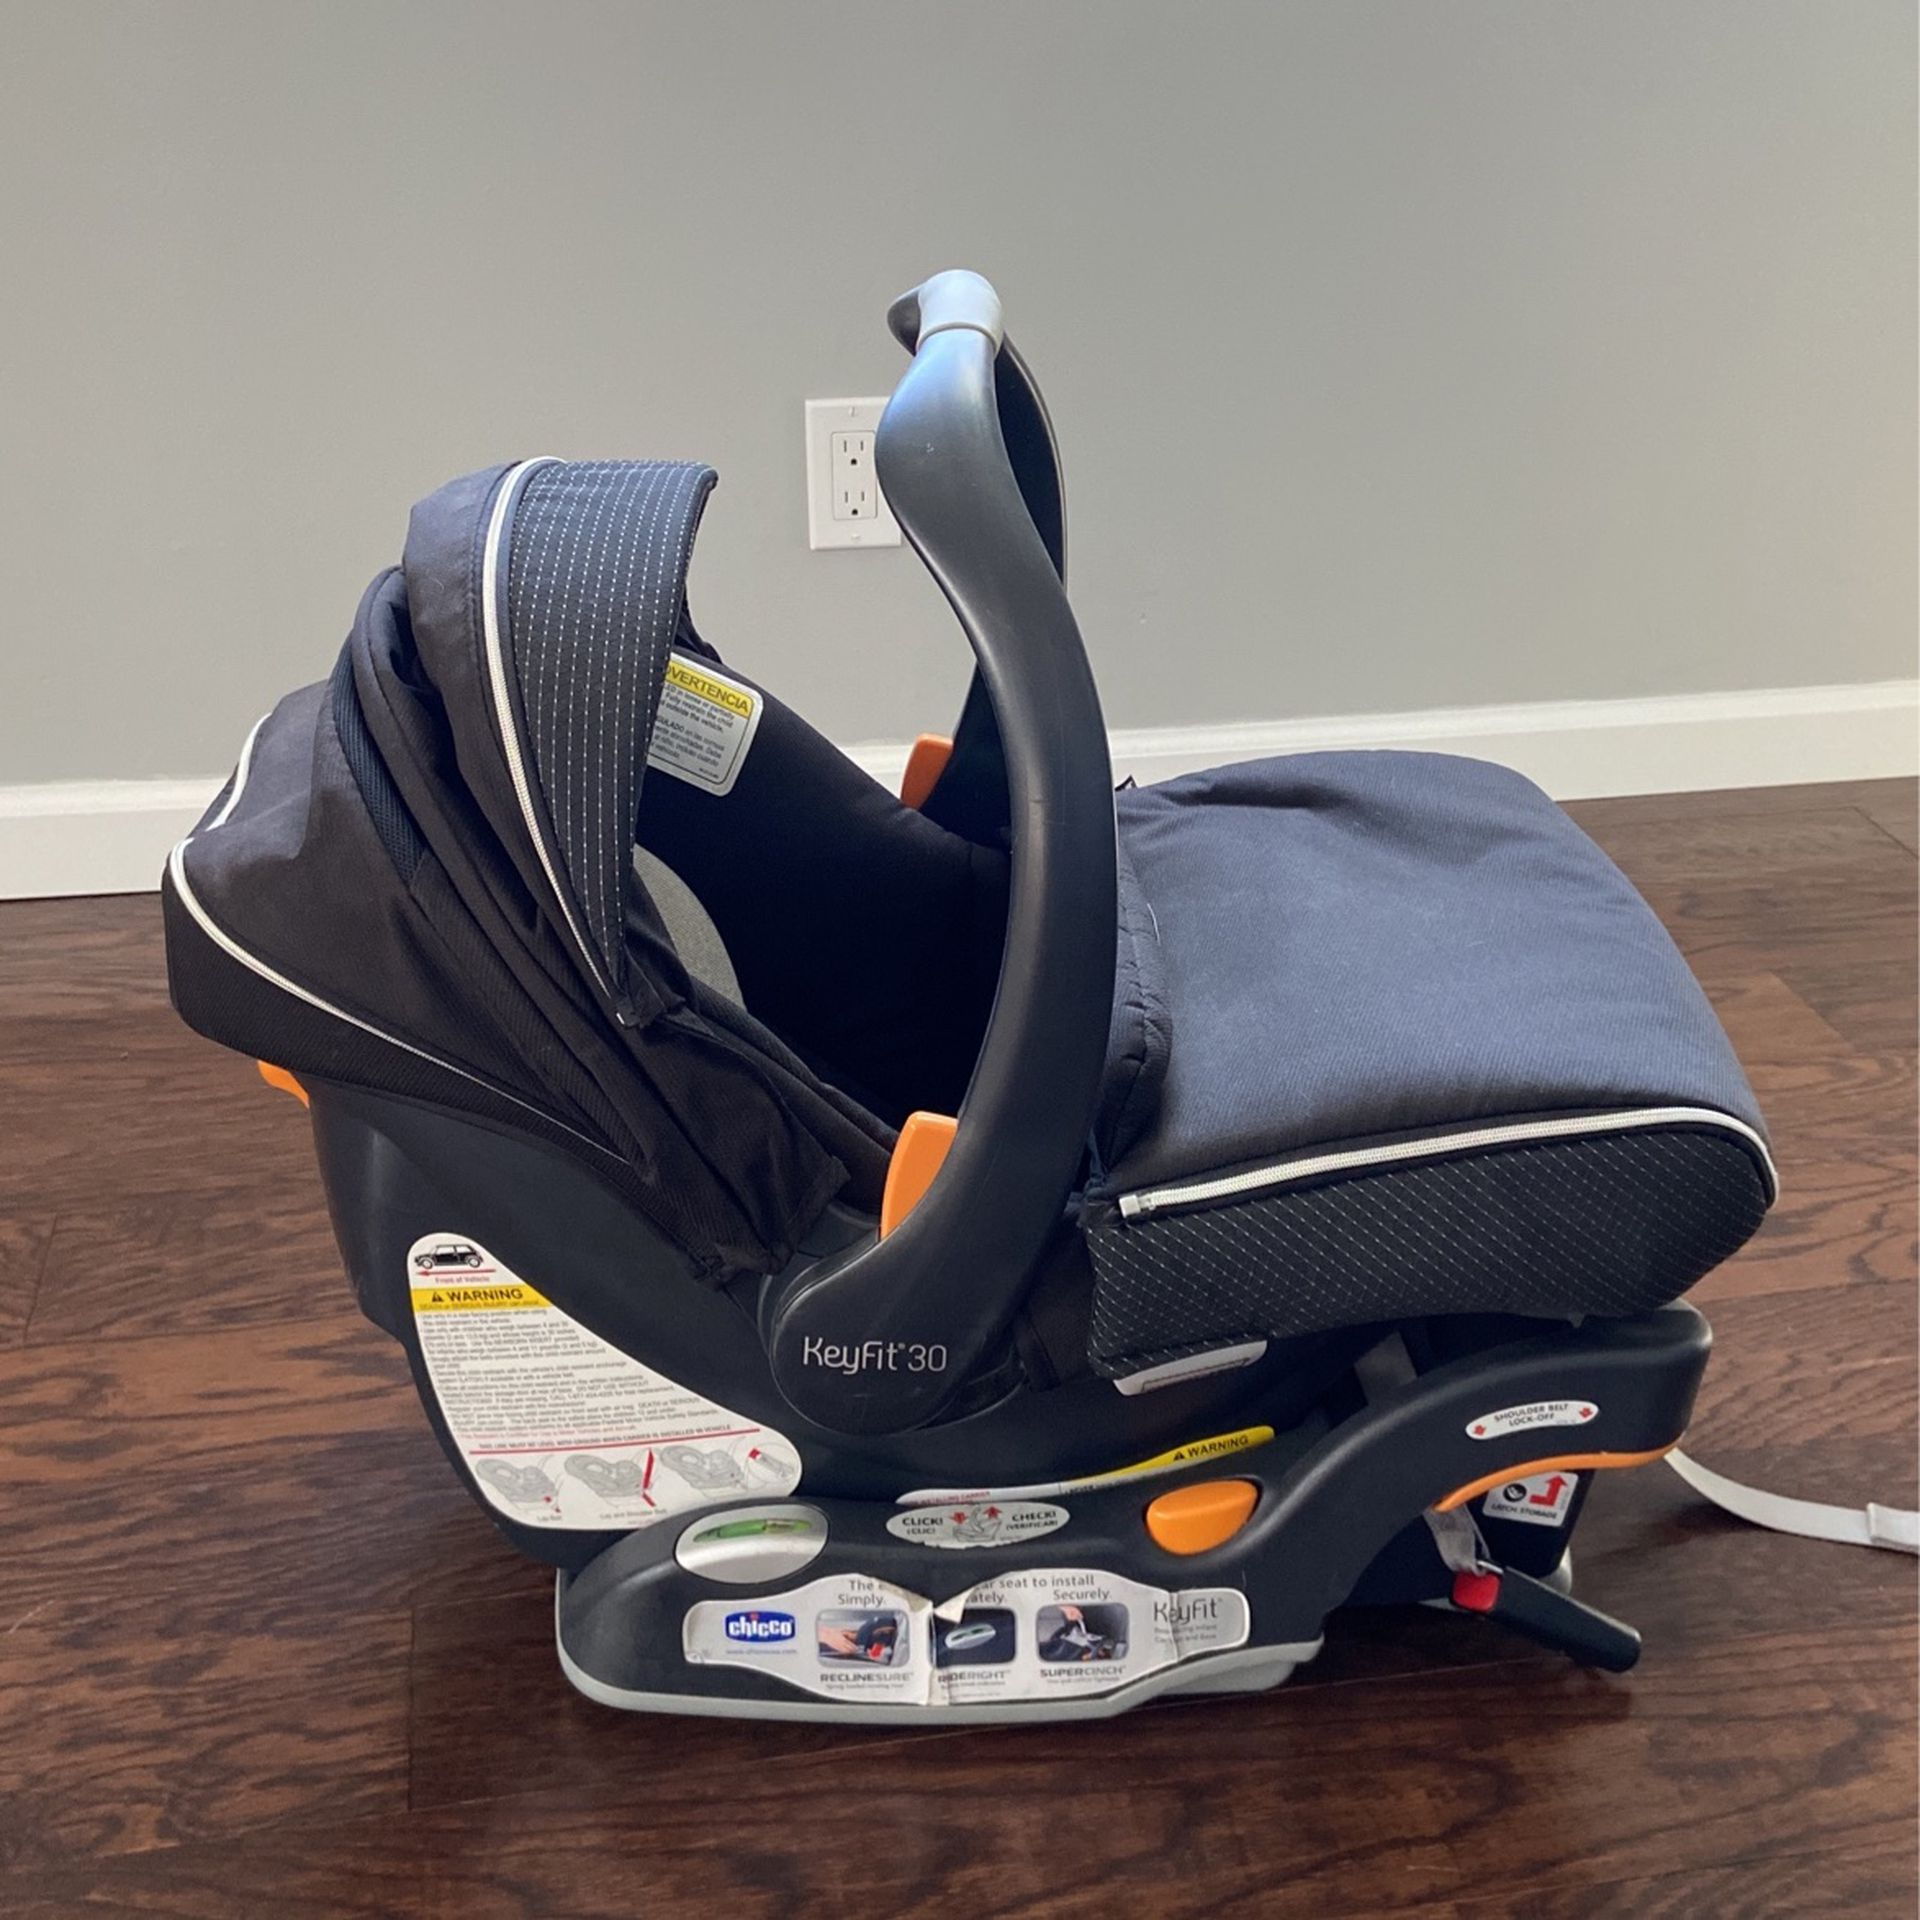 Chicco Keyfit 30 Infant Car seat